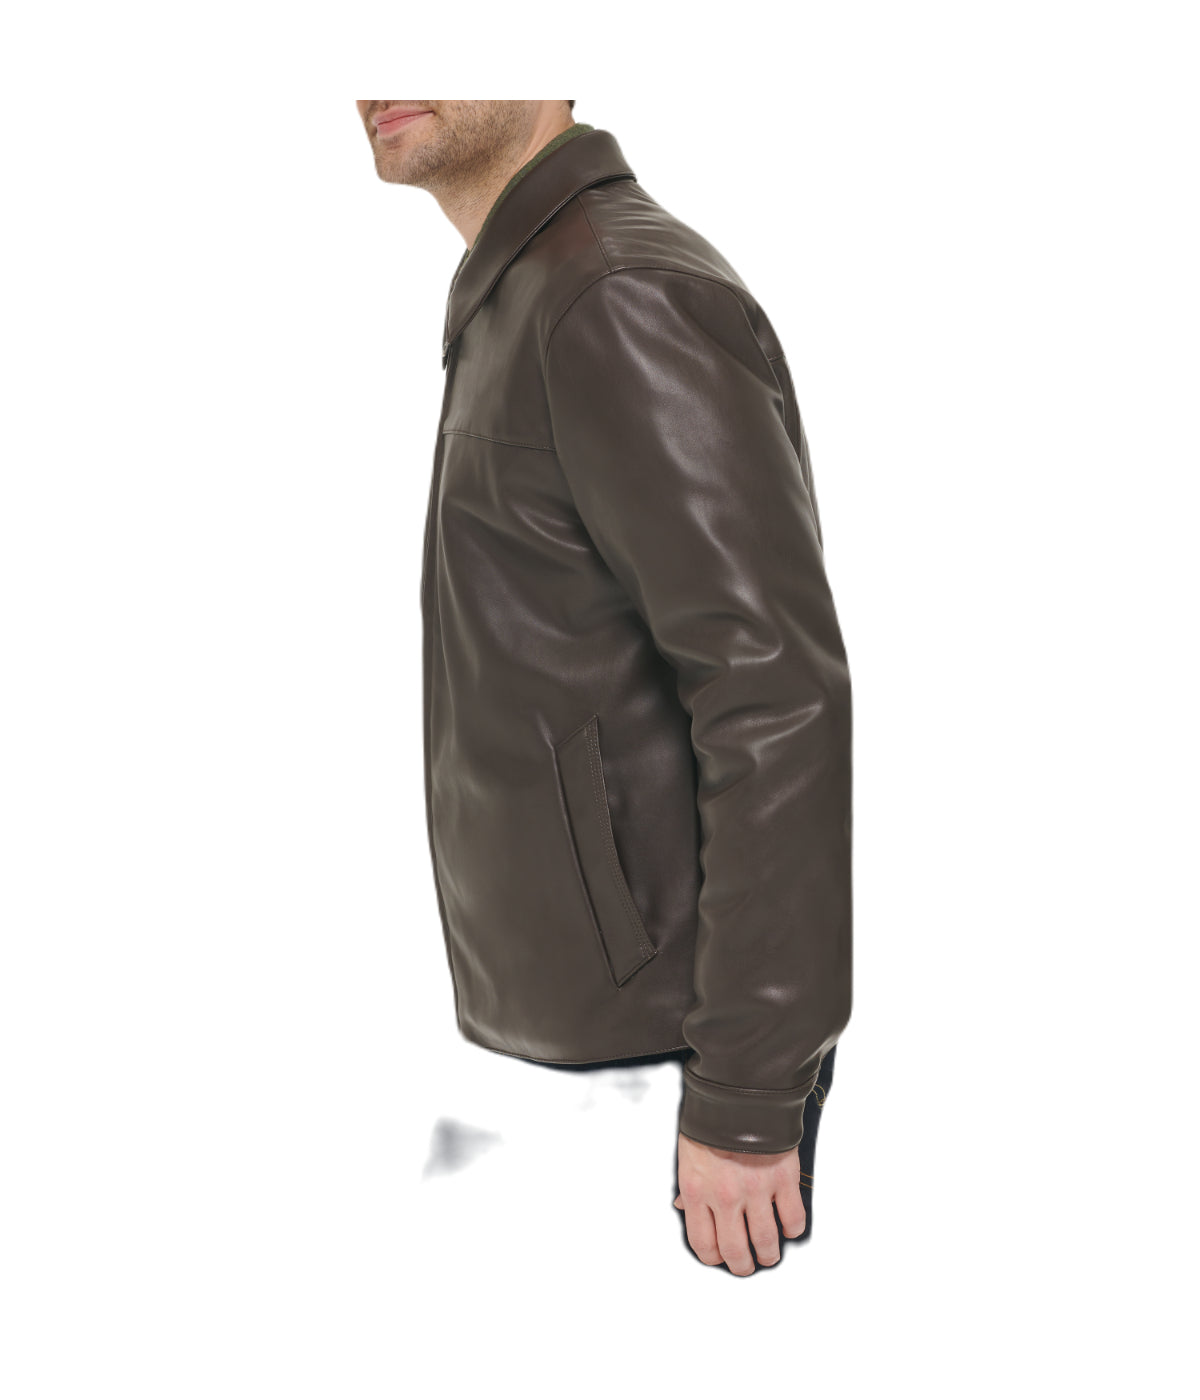 Mens Faux Leather Collared Jacket Dk Brown